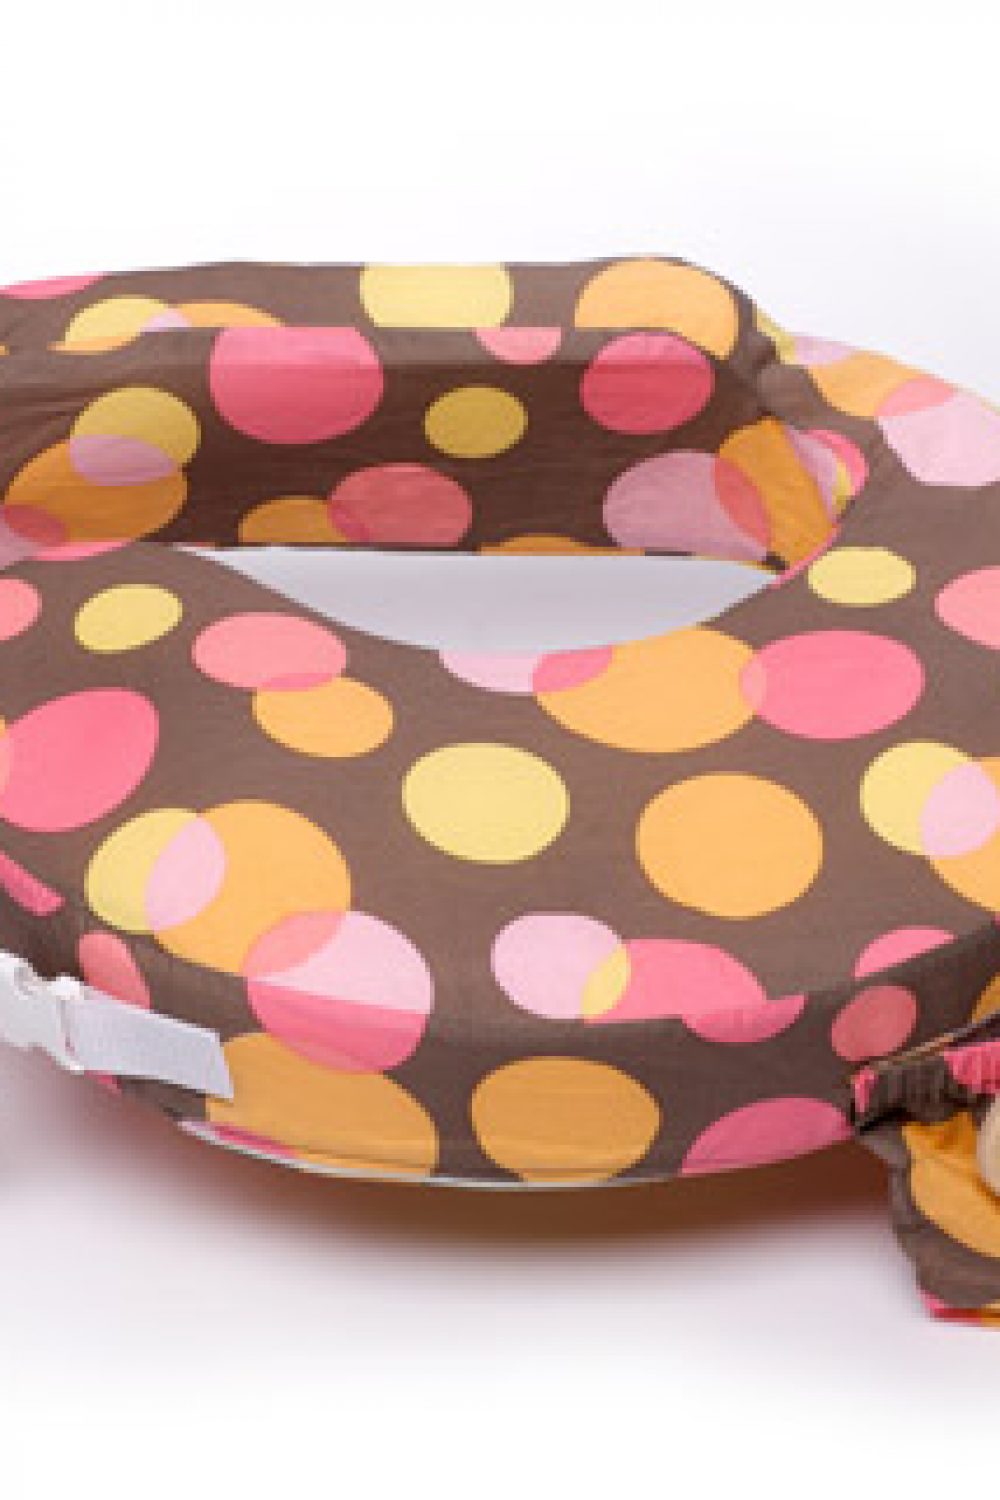 Whiny Wednesday: The Best Nursing Pillow Ever